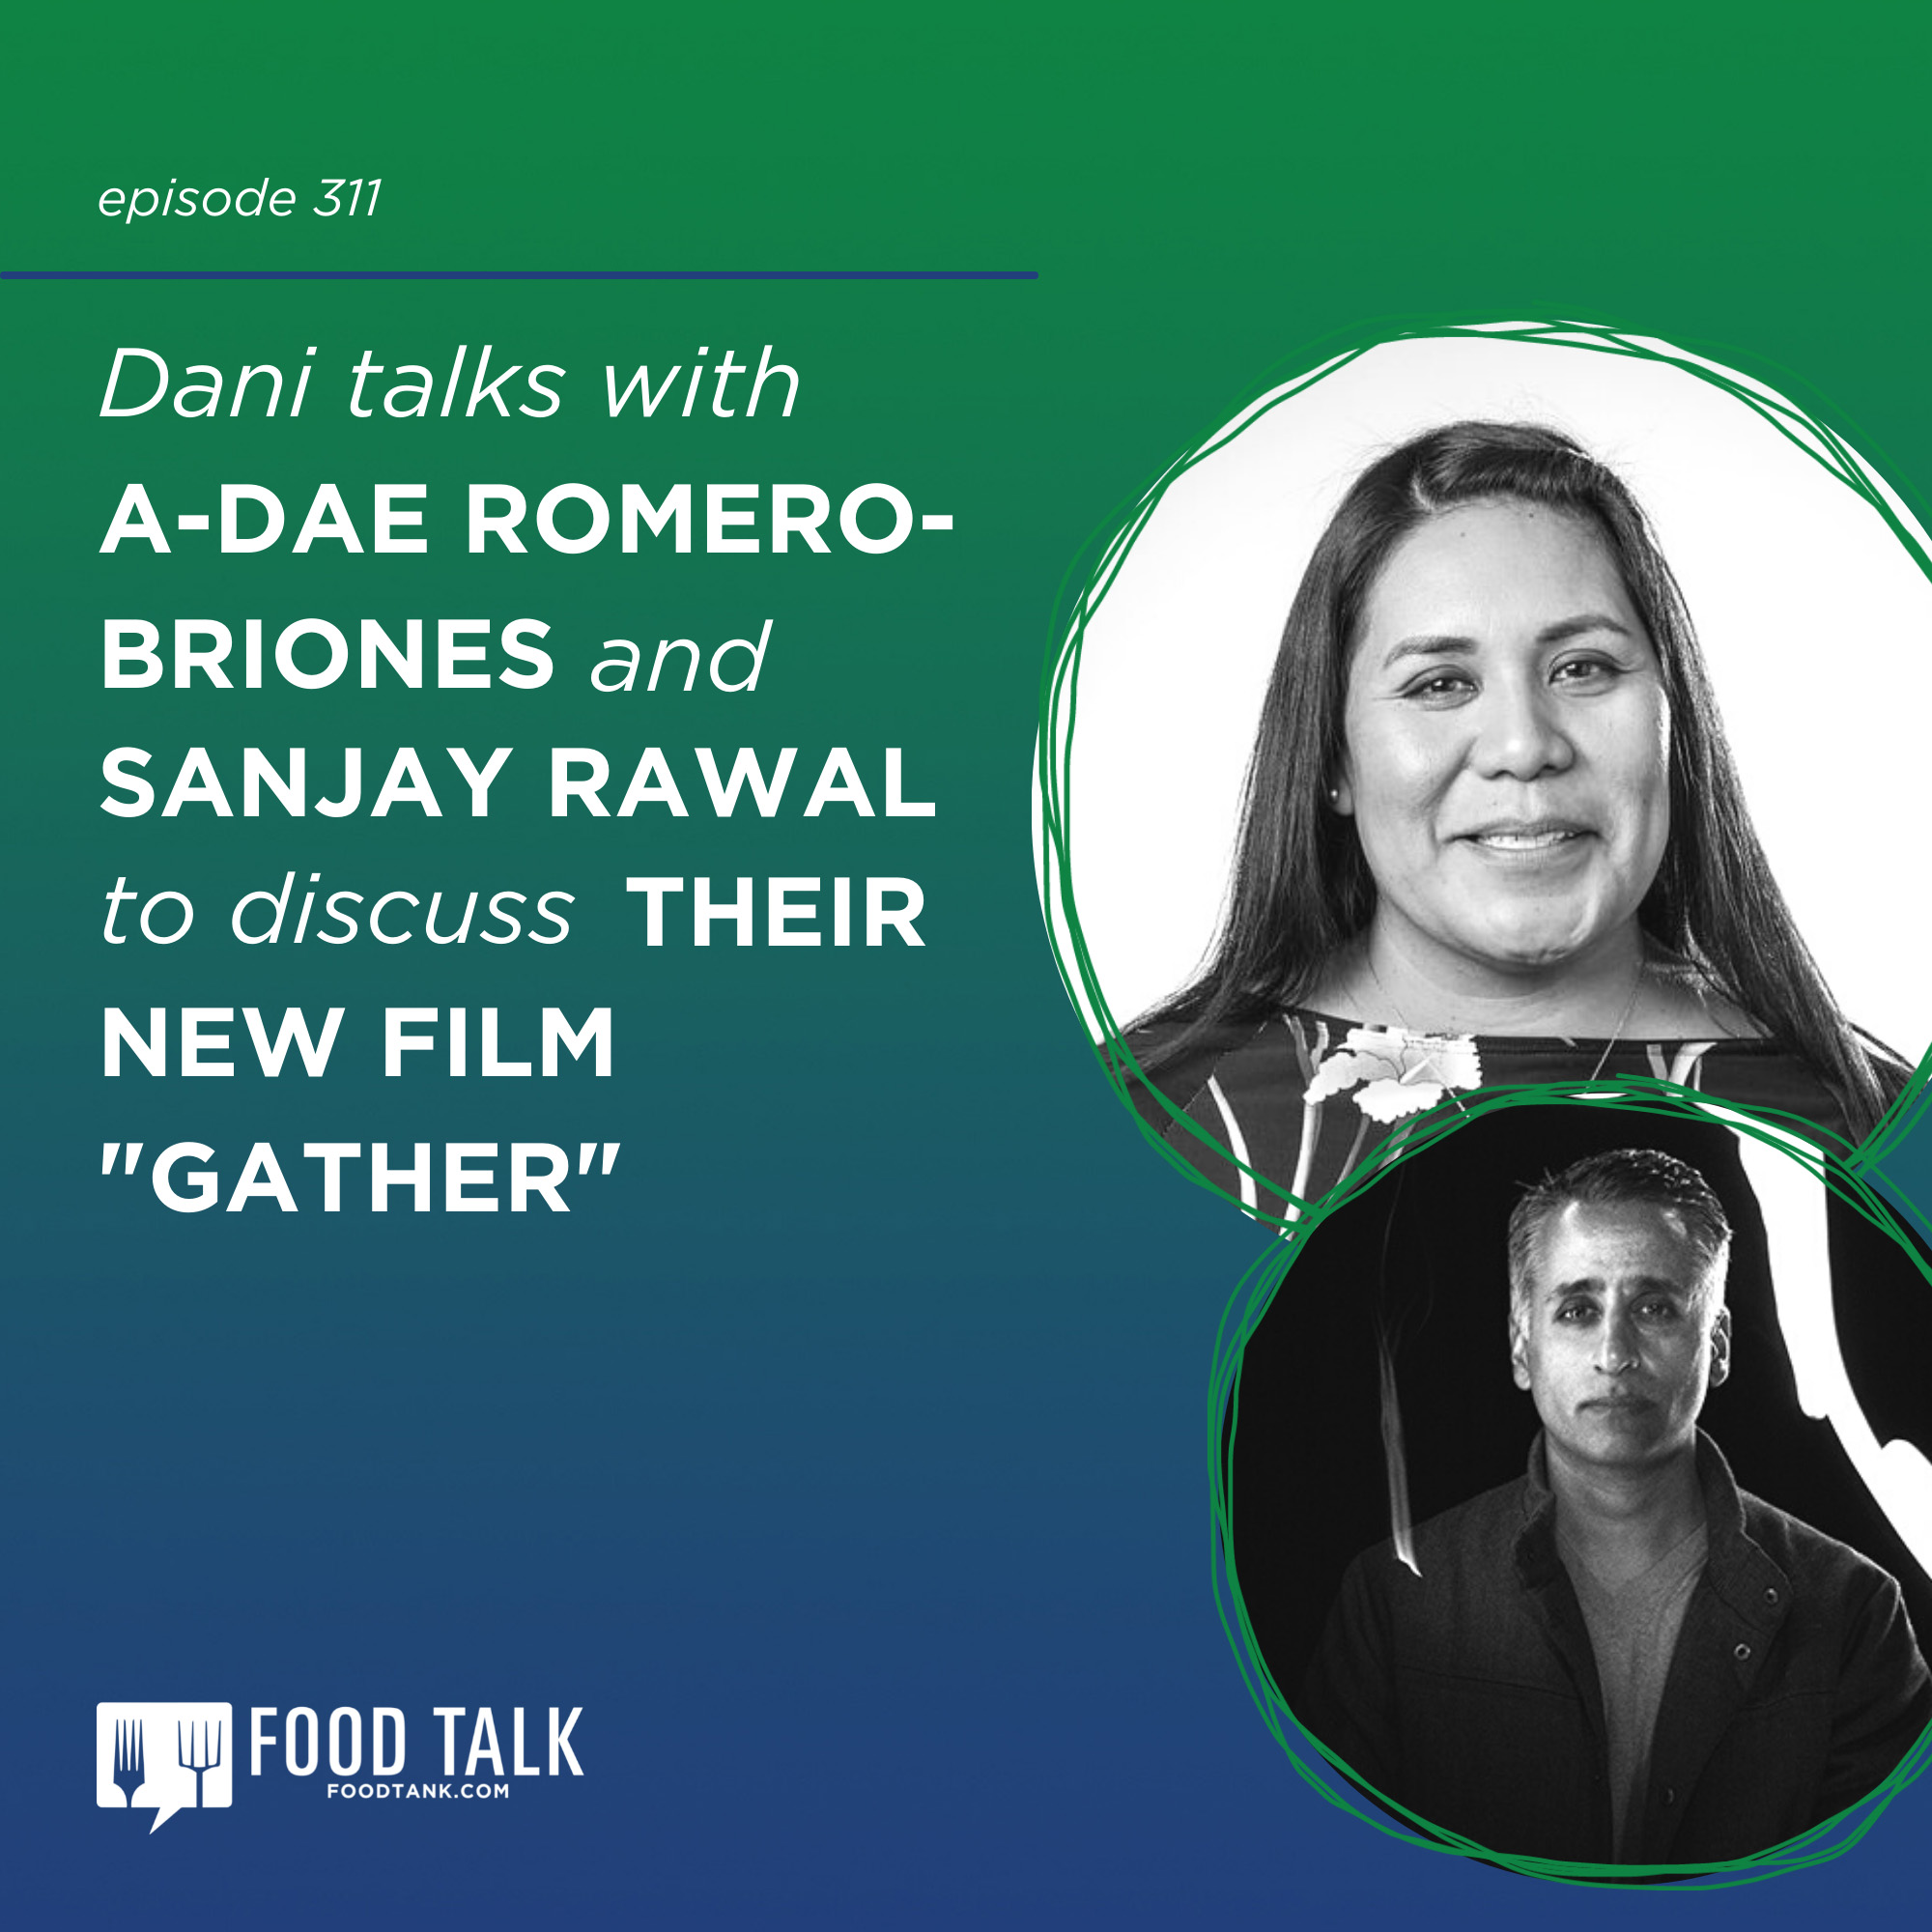 https://podcasts.apple.com/us/podcast/311-gather-with-a-dae-romero-briones-and-sanjay/id1434128568?i=1000554822447